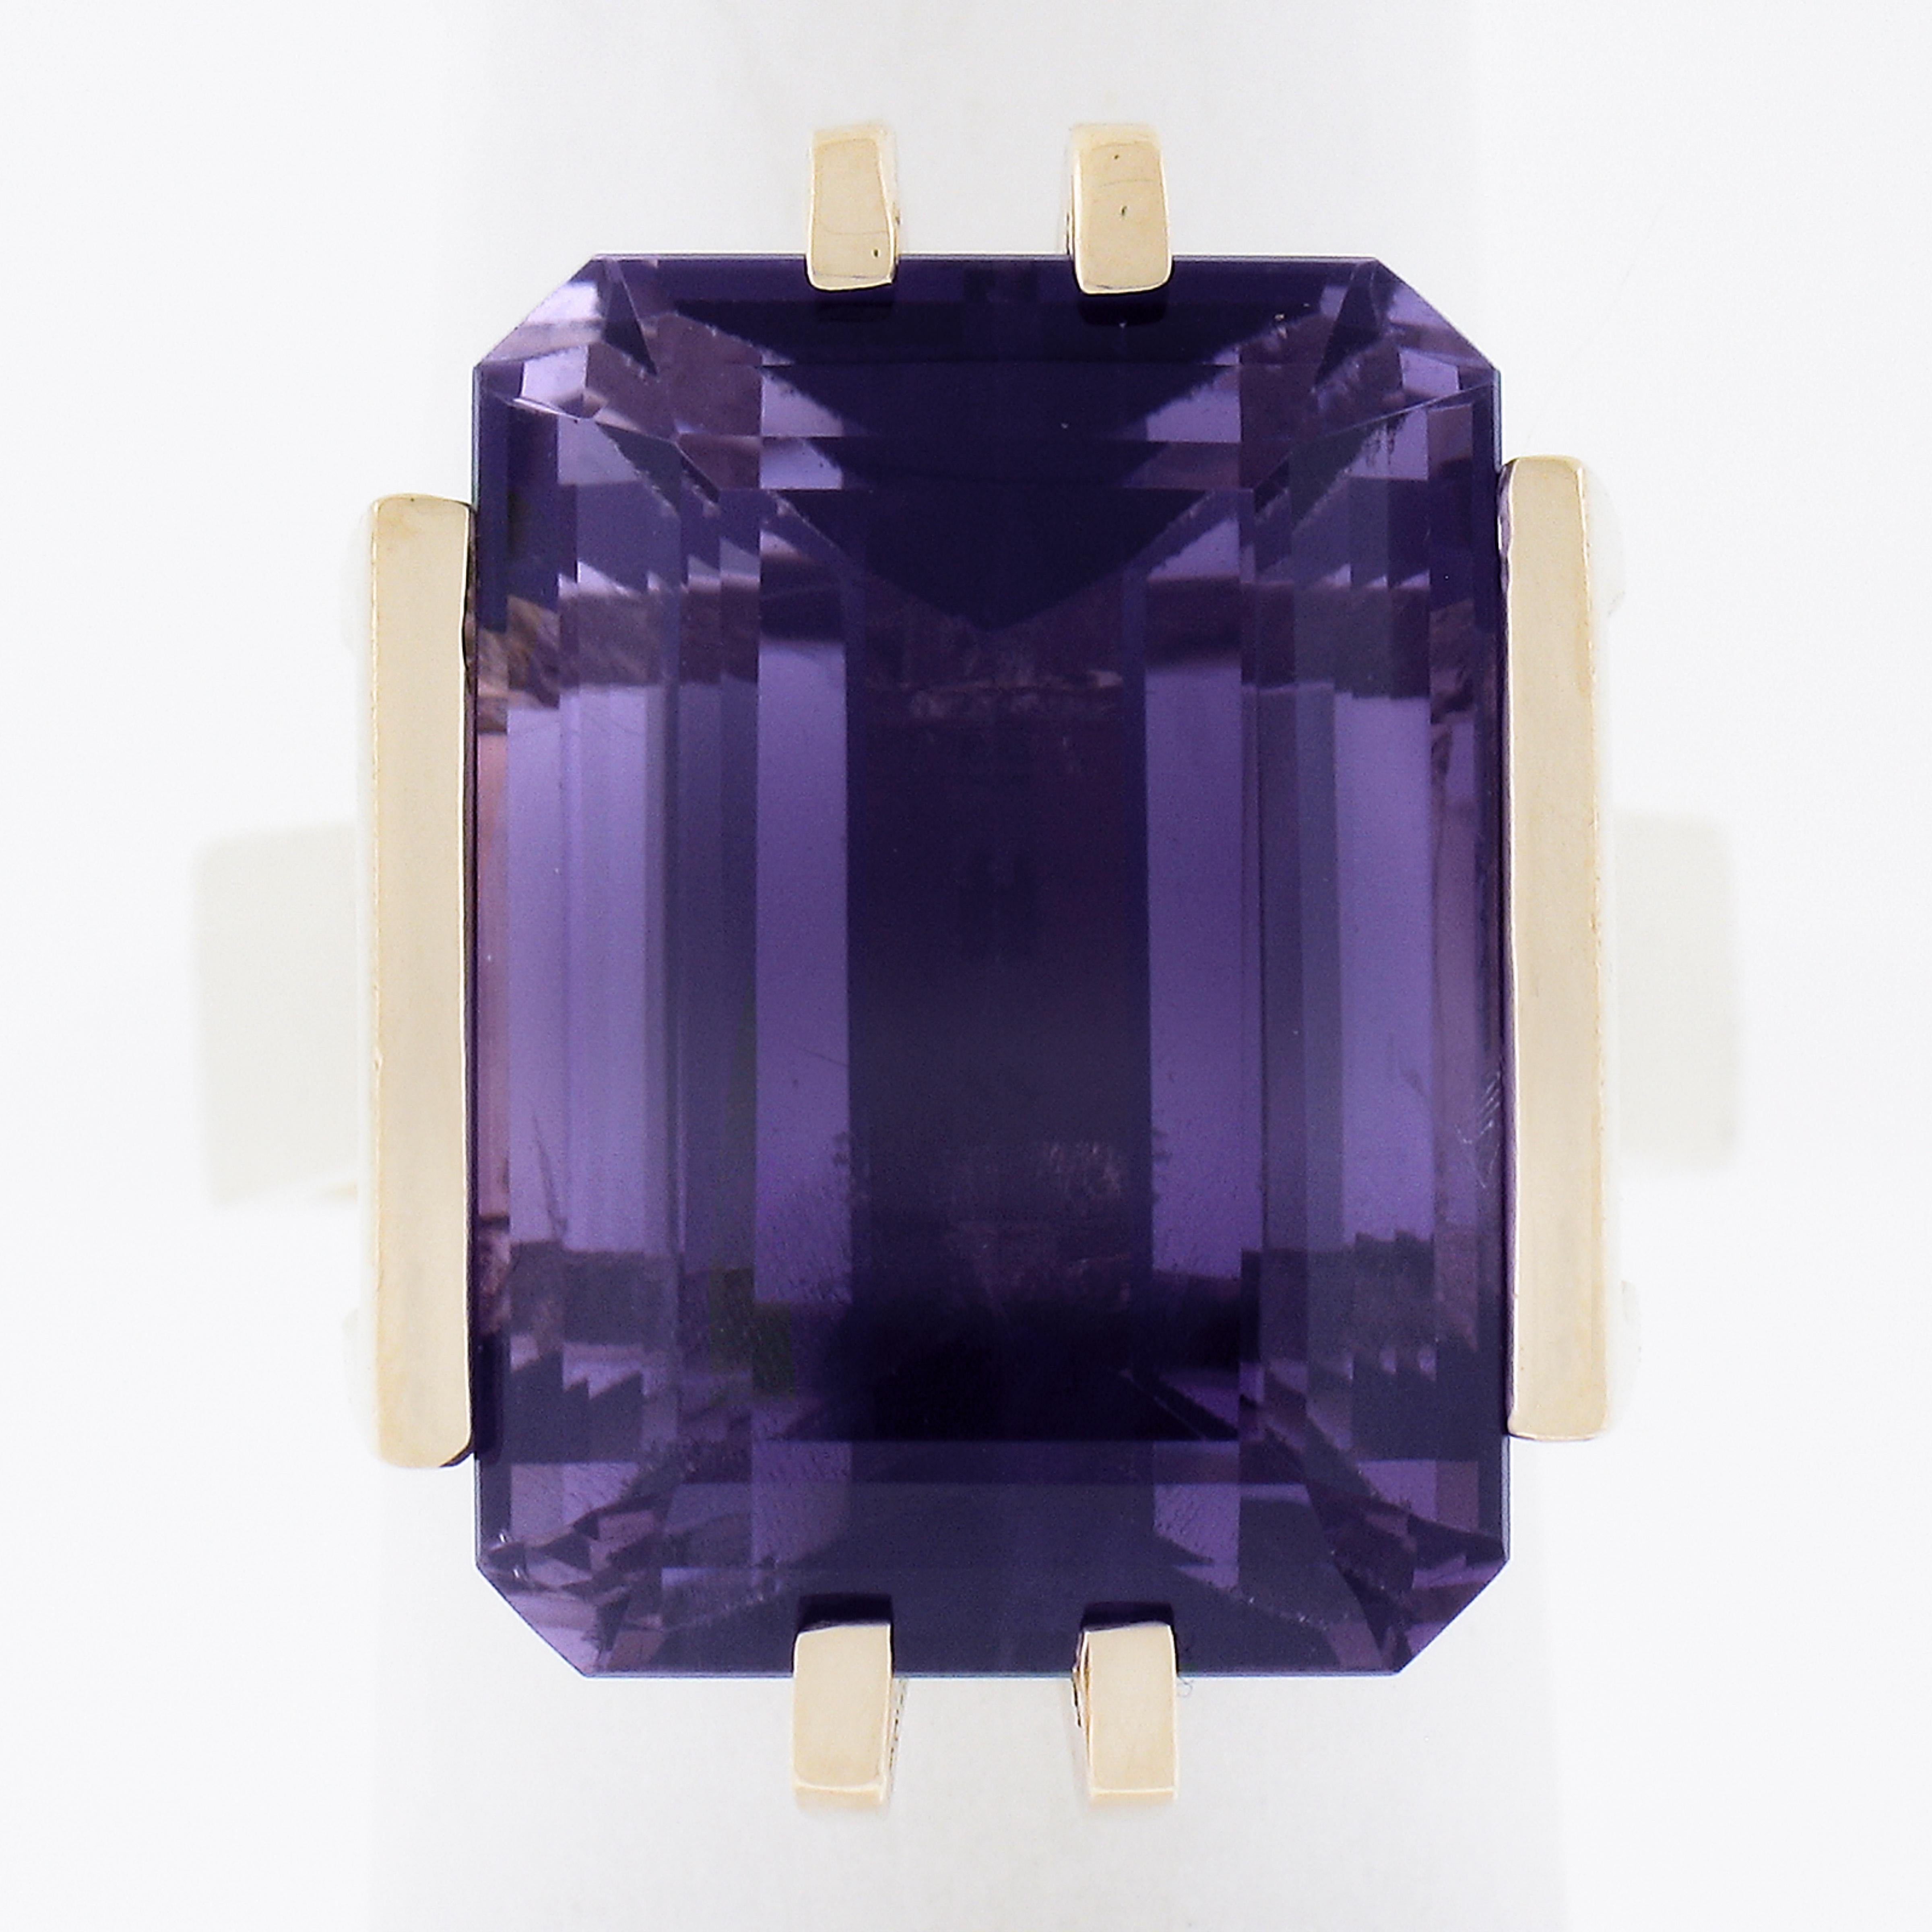 --Stone(s):--
(1) Natural Genuine Amethyst - Emerald Cut - Prong Set - Rich Deep Purple Color - 18x13mm - 18-20ct (approx.)

Material: 14K Solid Yellow Gold
Weight: 13.27 Grams
Ring Size: 5.5 (Fitted on a finger. We can NOT custom size this